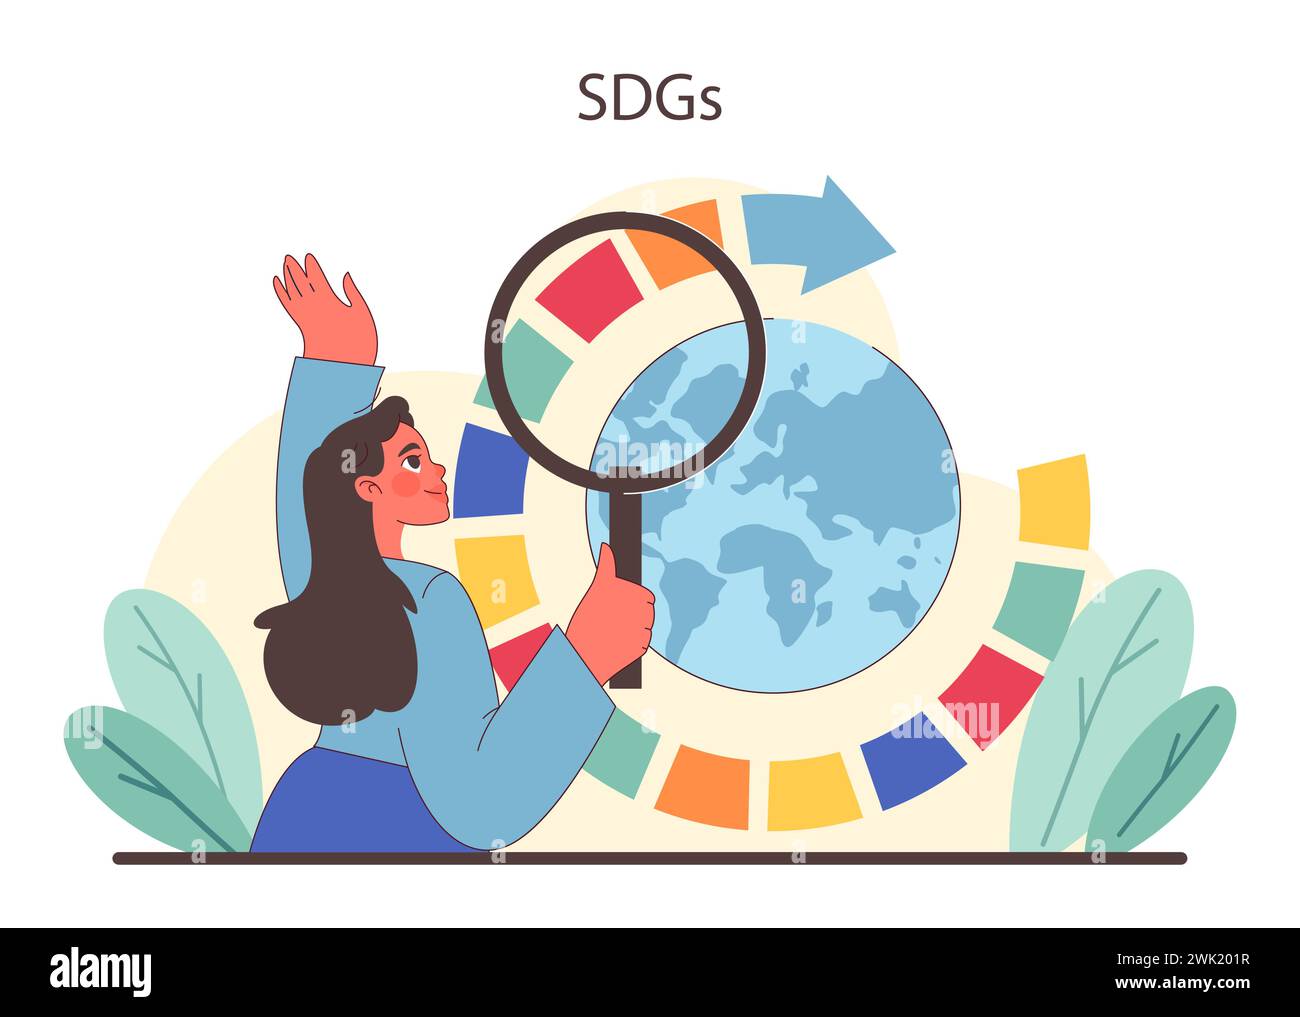 World goals spotlight set. An enthusiastic exploration of global ambitions. Focusing on collective targets through the lens of progress. Unity in diversity for a thriving planet. Stock Vector